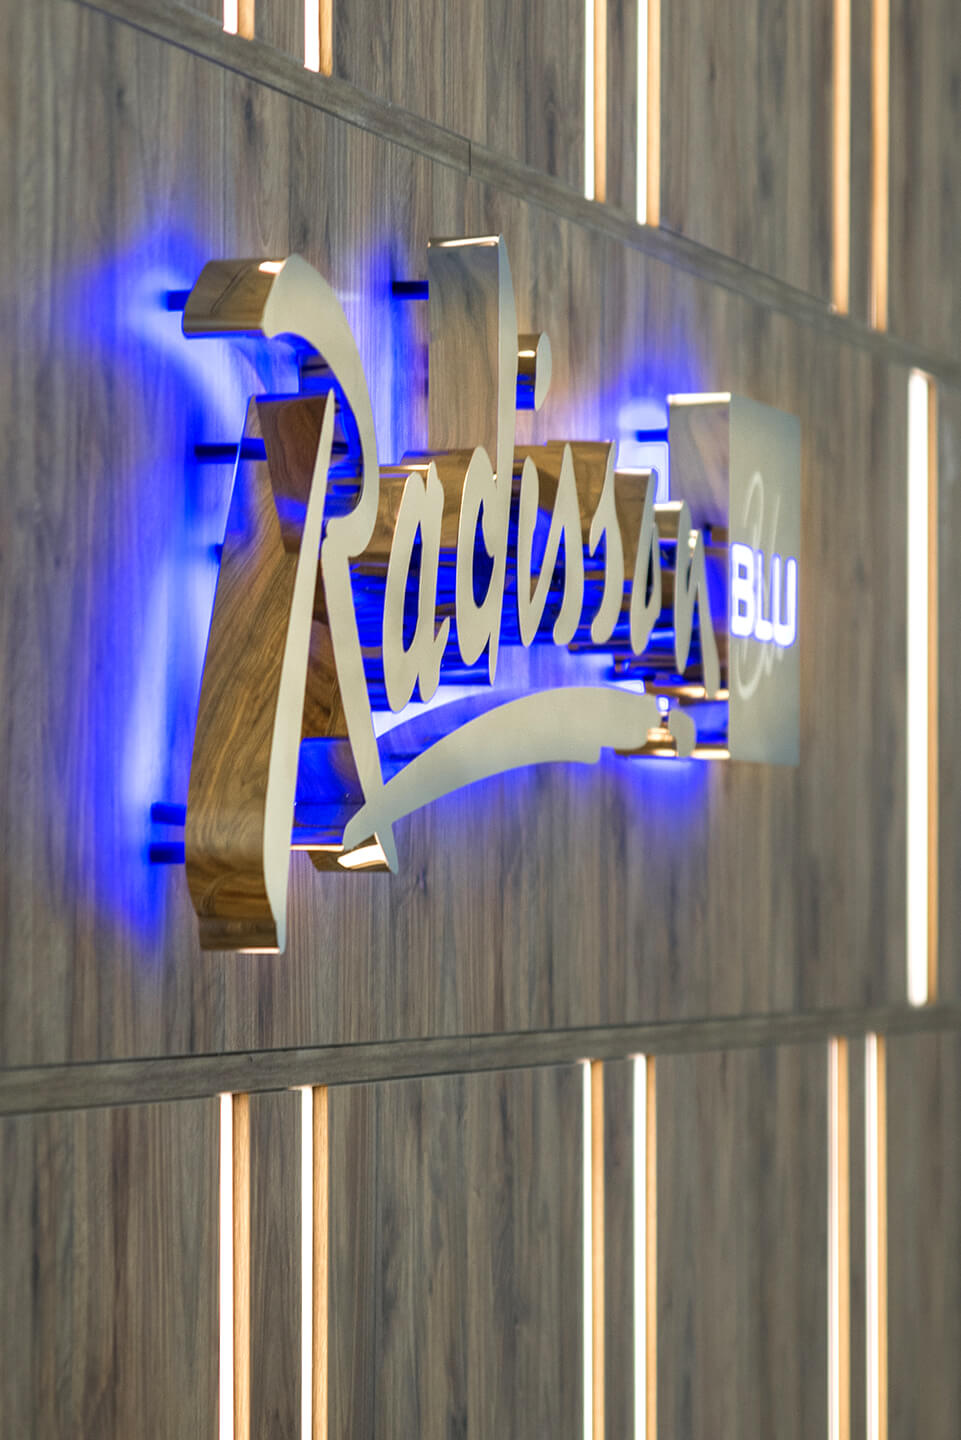 radisson-blu-letters-from-steel-plate-literature-behind-reception-in-hotel-on-a-wooden-wall-literature-literature-lit-from-behind-blue-sopot-logo-firm-literature-exclusive-glamour